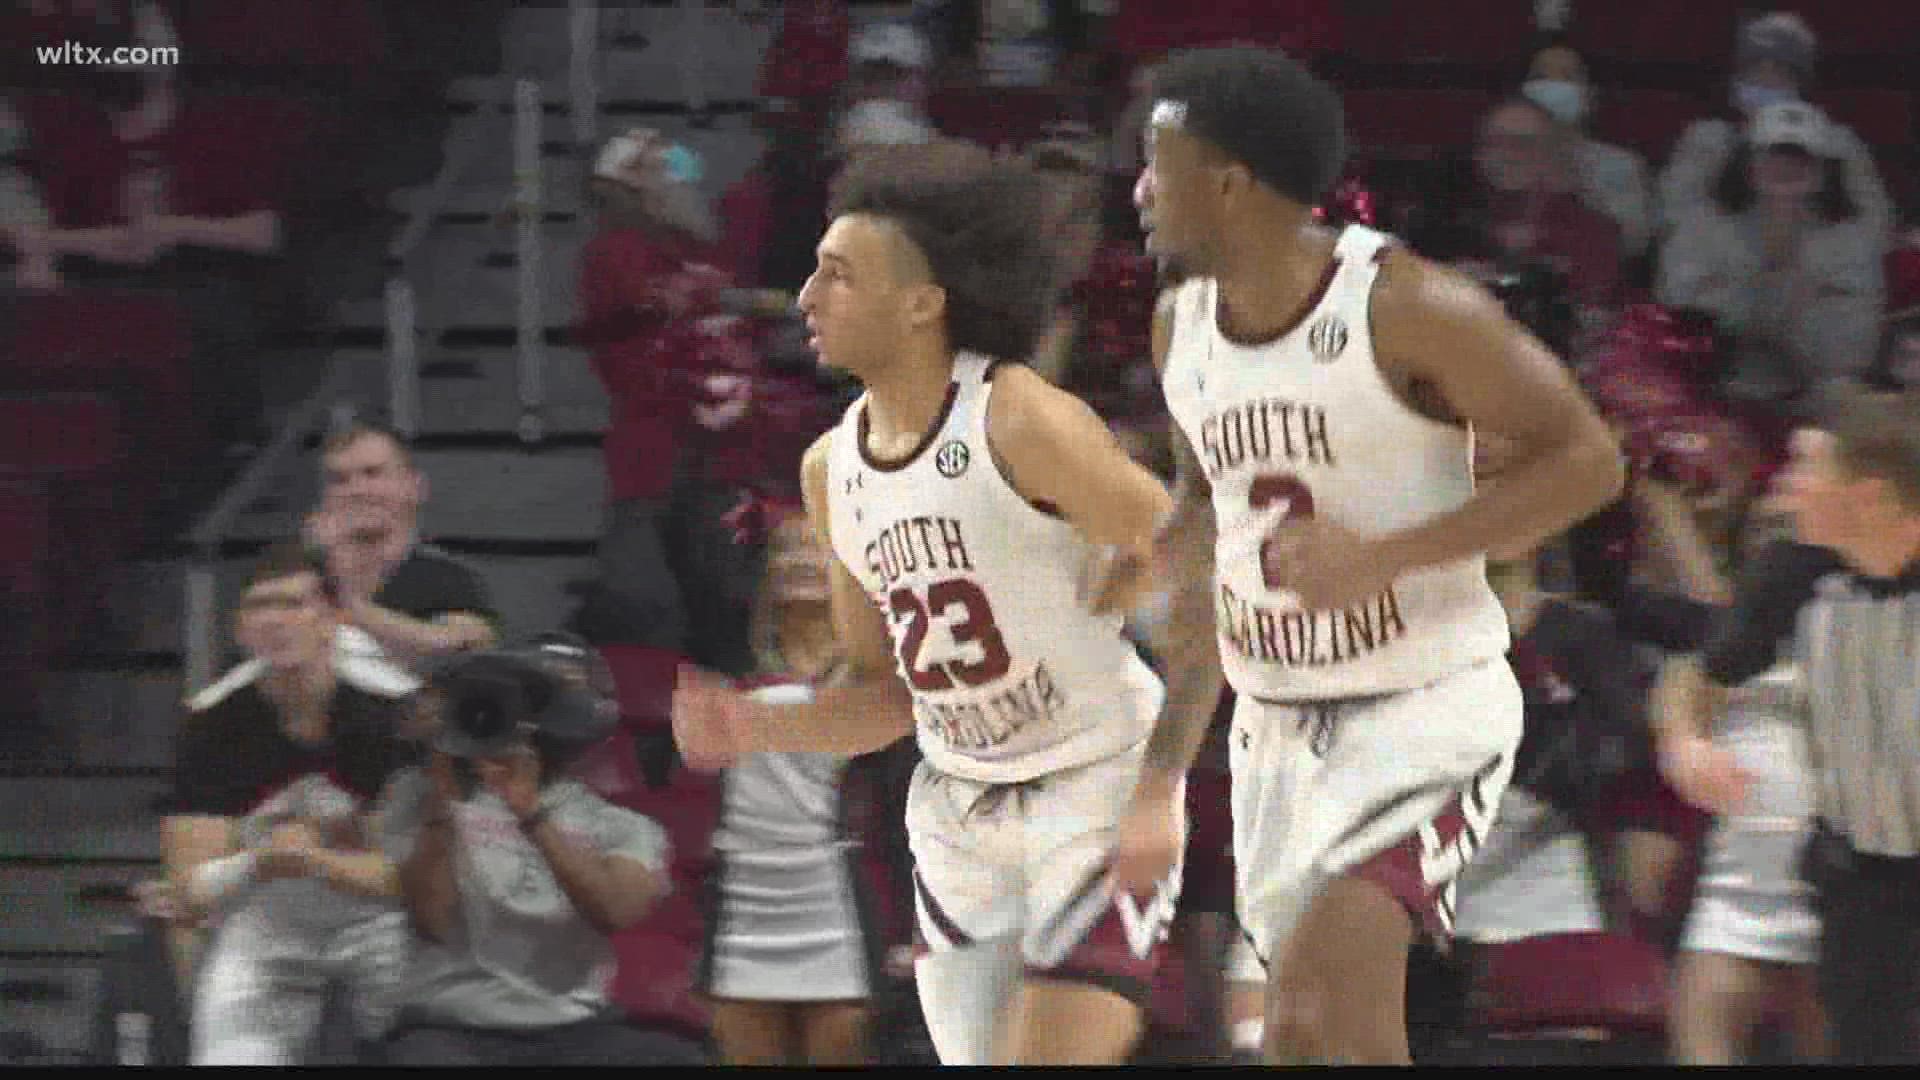 Wednesday night's matchup between the University of South Carolina and South Carolina State's men's basketball teams has been postponed due to COVID-19 concerns.